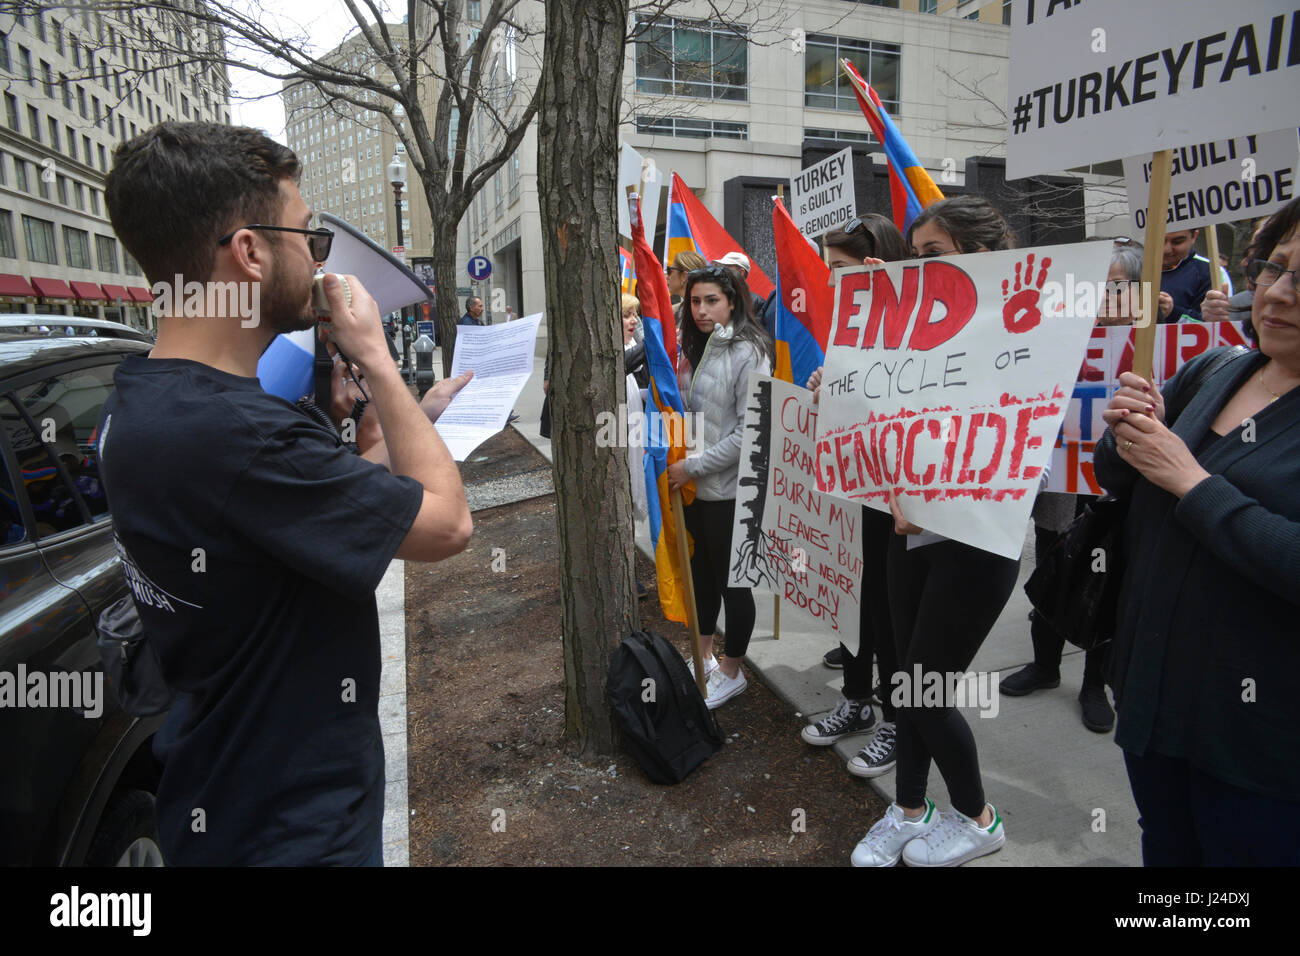 Boston, Massachusetts, USA. 24th Apr, 2017. Armenian Americans in Boston commemorate the 102 anniversary of the 1915 Armenian Genocide by Turkey during the First World War by protesting in front of the Turkish Consulate. Turkey denies that there was a genocide. The Armenians and historians world wide say 1.5 million were killed.This years commemoration of the Armenian Genocide was energized by the release of the Armenian Genocide based film ''The Promise'' that opened in theaters in the United States three days ago. Credit: Kenneth Martin/ZUMA Wire/Alamy Live News Stock Photo